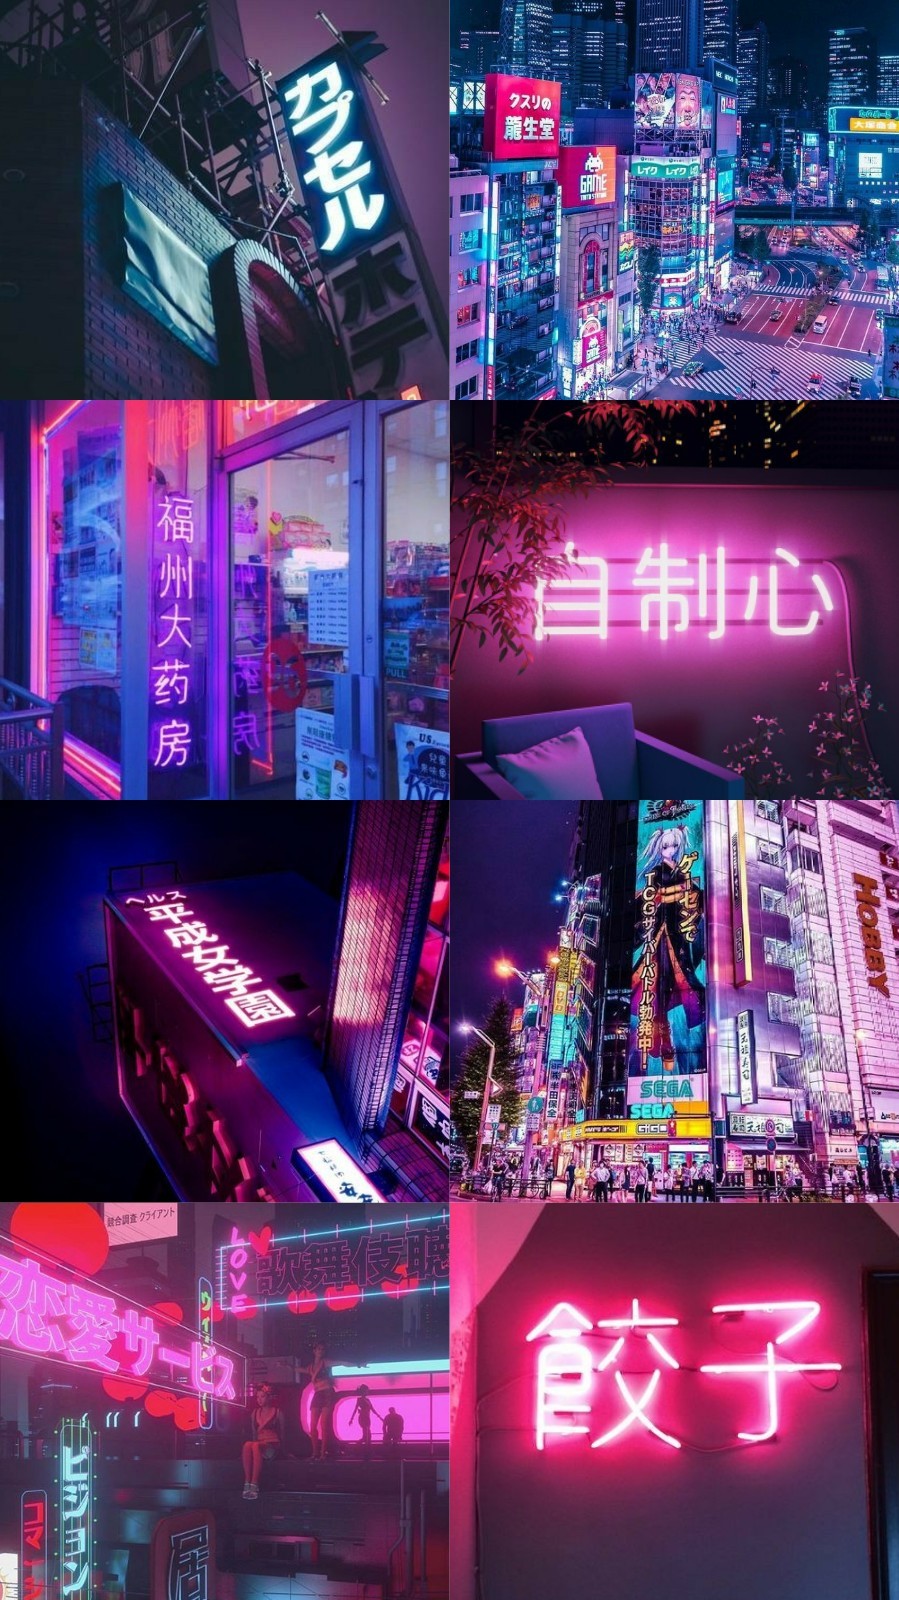 Purple Japanese Aesthetic Wallpaper, Tokyo Aesthetic Wallpaper On Wallpaperdog, We've gathered more than 5 million image uploaded by our users and sorted them by the most popular ones